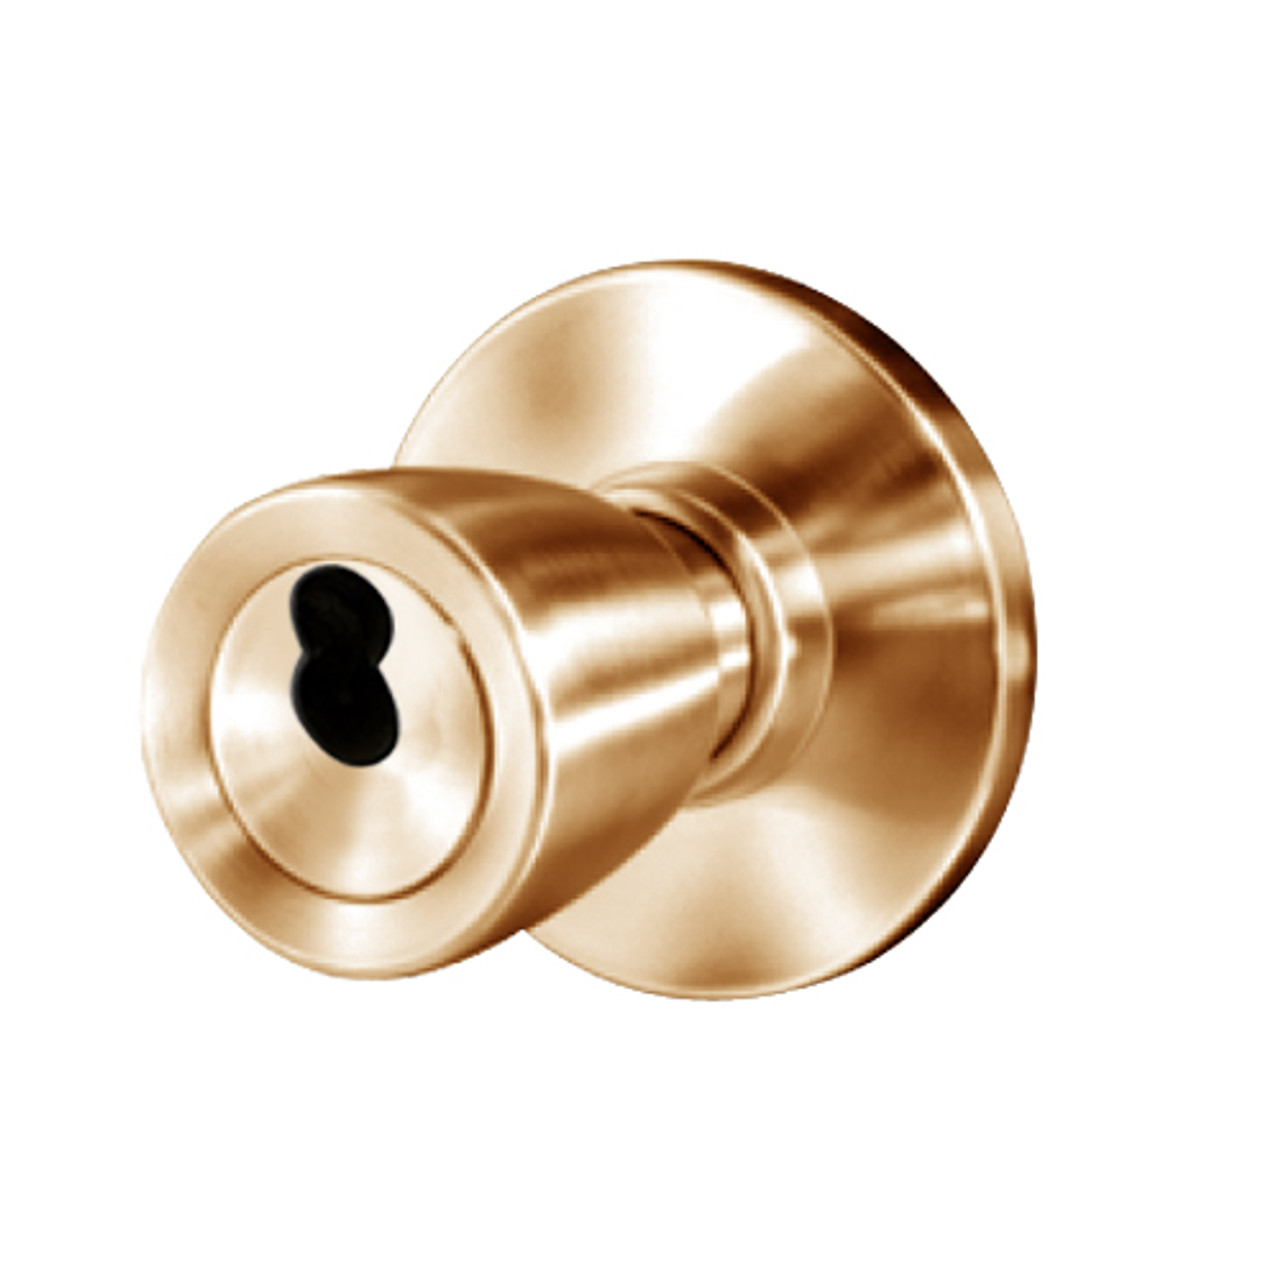 8K57S6AS3611 Best 8K Series Communicating Heavy Duty Cylindrical Knob Locks with Tulip Style in Bright Bronze